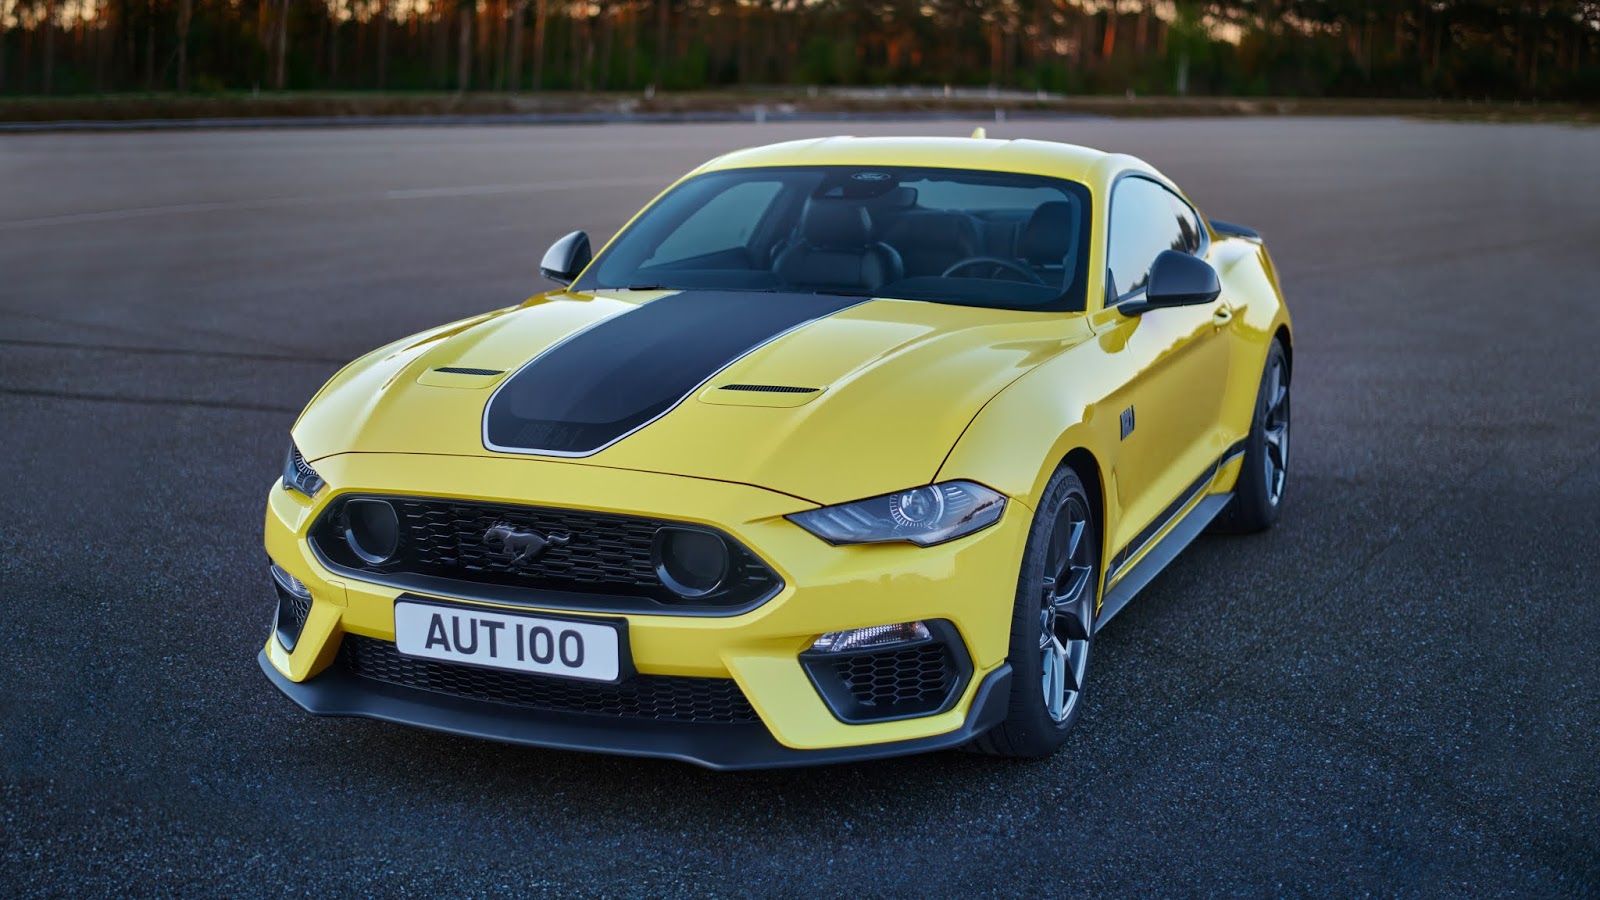 FORD 2021 MUSTANG MACH ONE ACCELERATION 09 1 Η Ford Mustang Mach 1 προσγειώνεται στην Ευρώπη